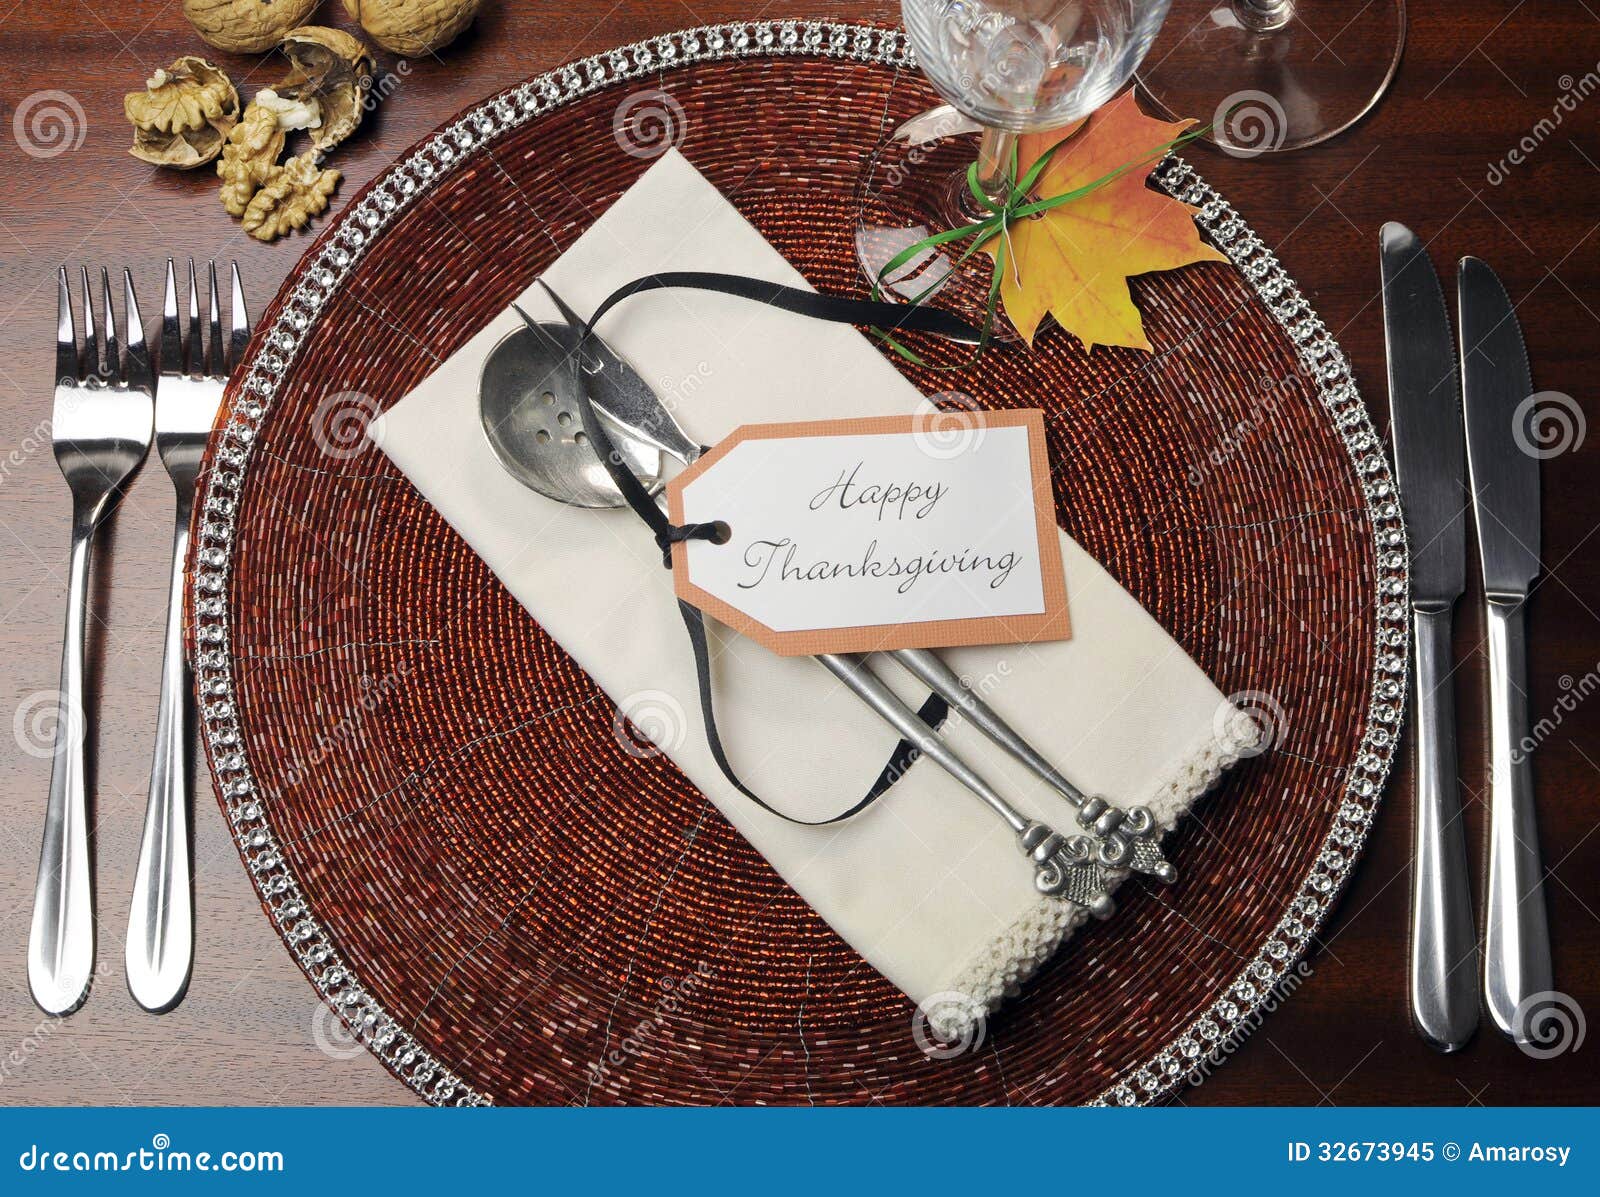 Thanksgiving Dinner Table Place Setting - Aerial View Stock Image